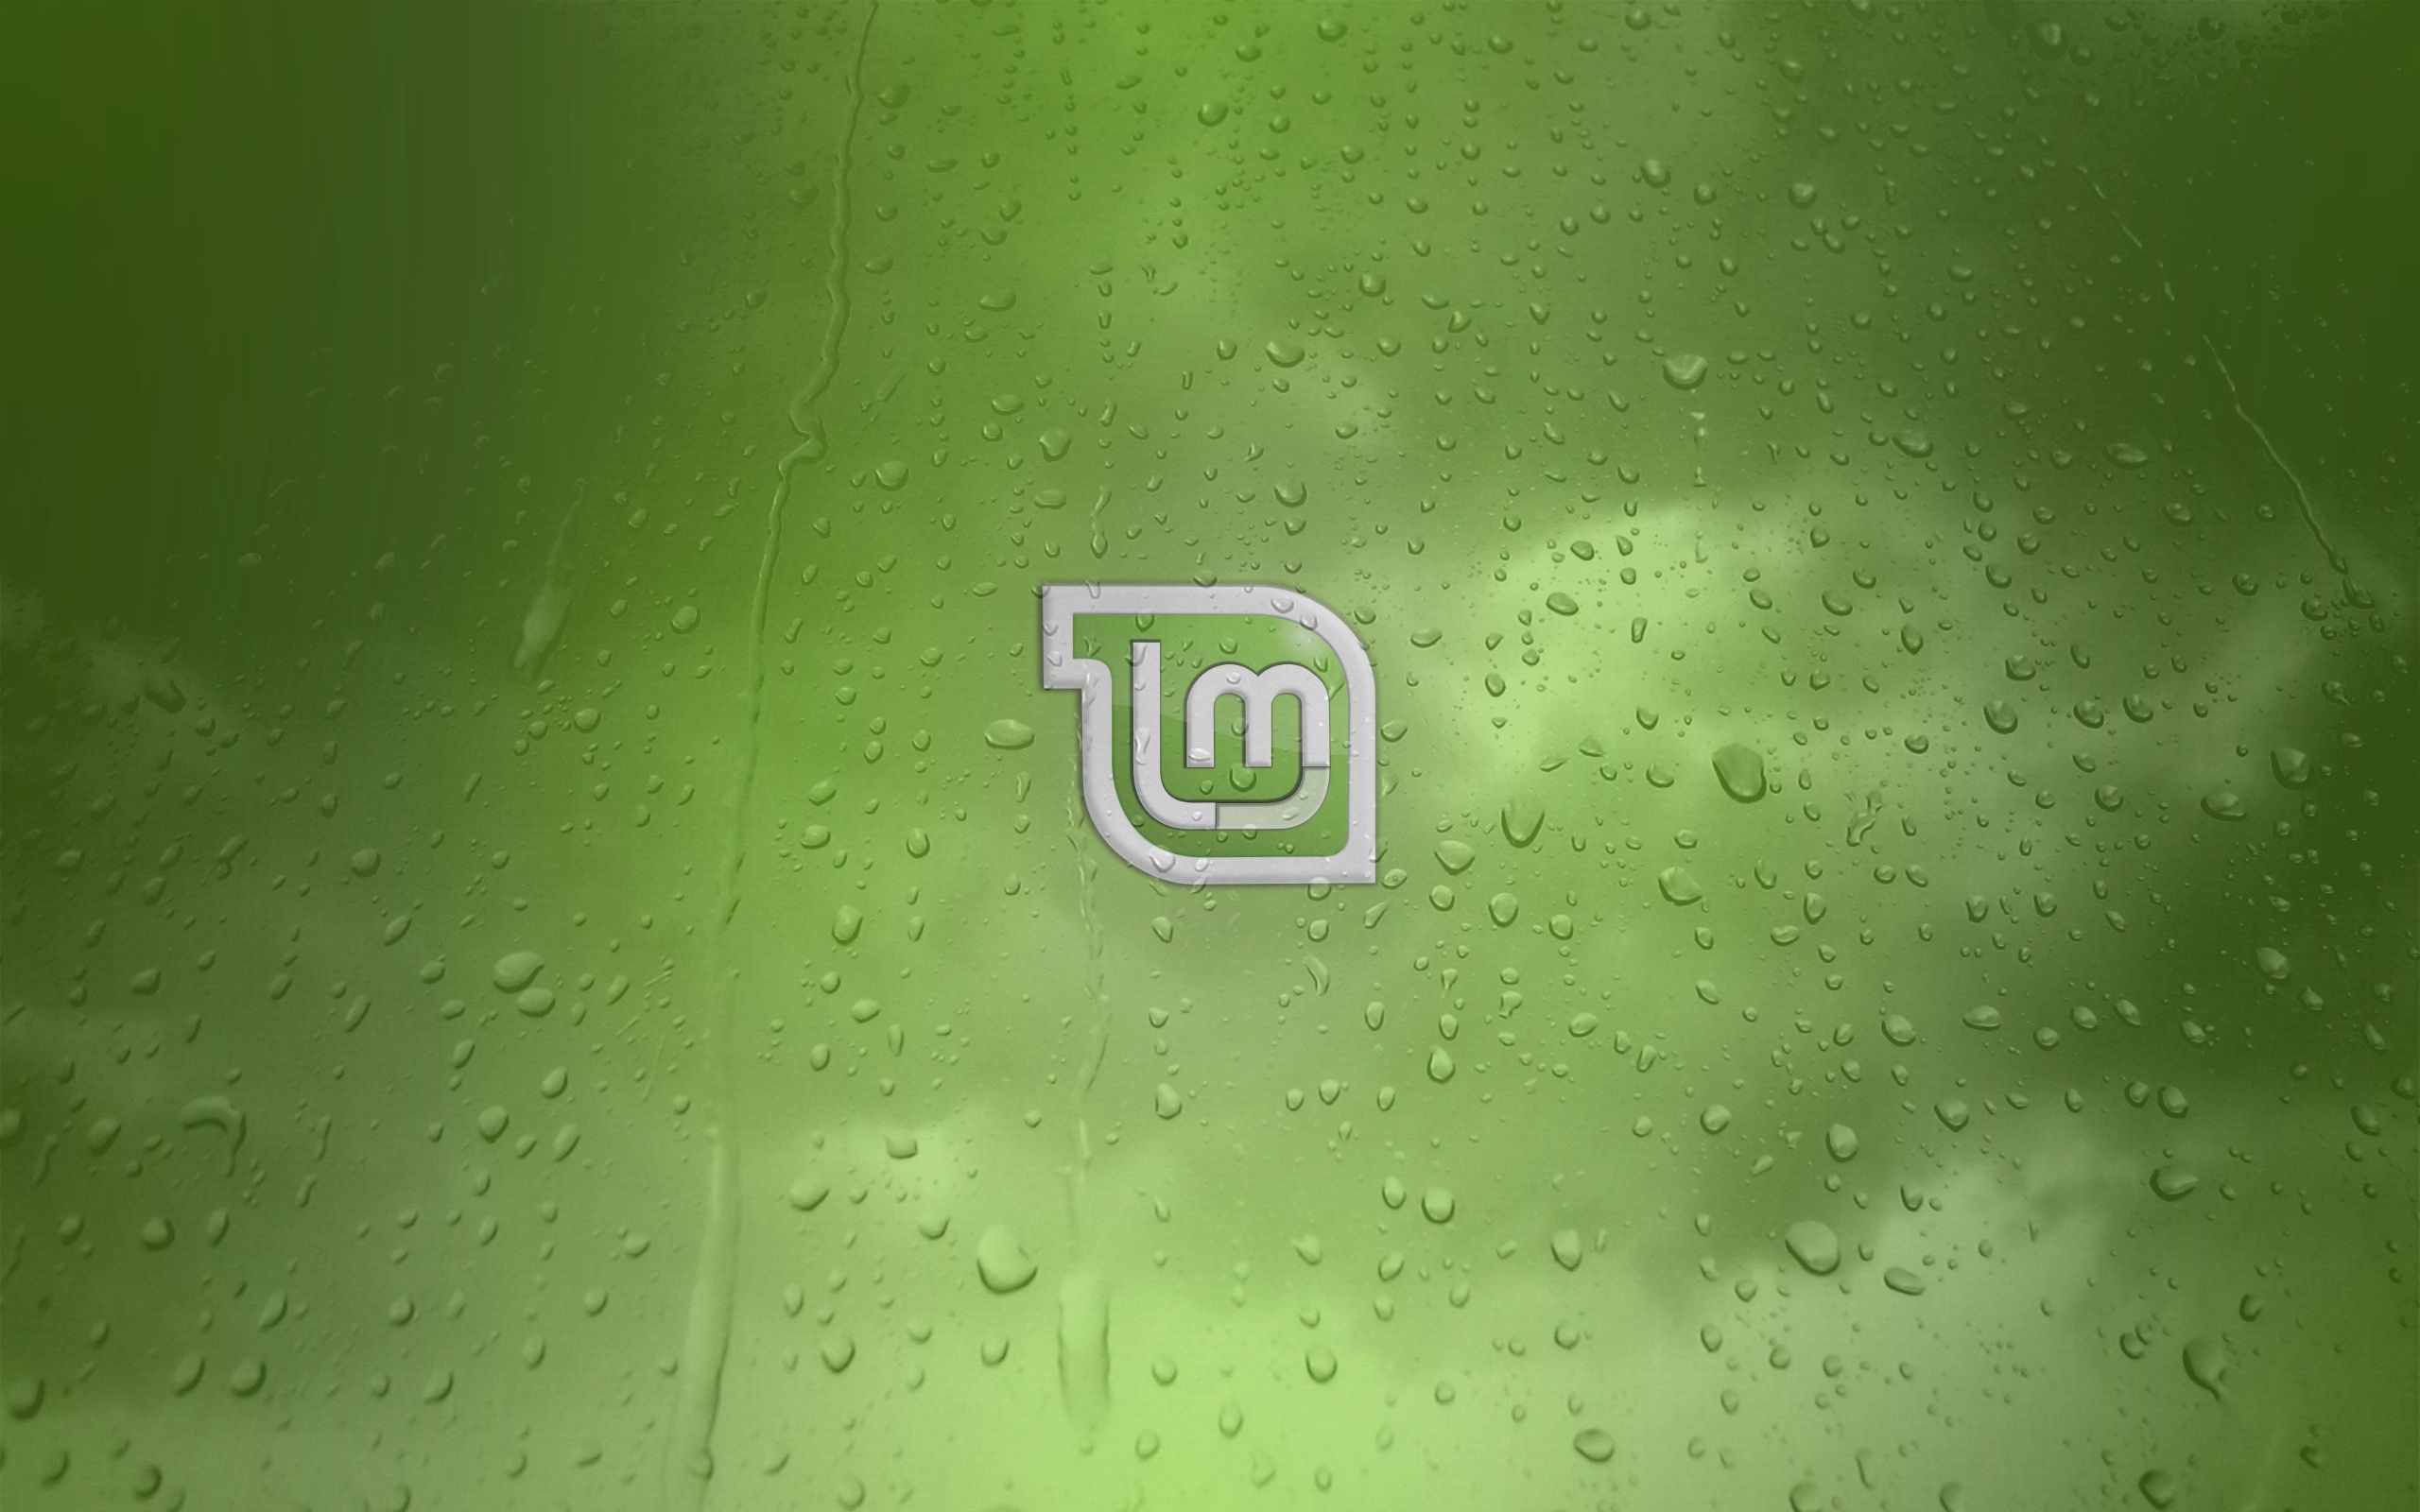 Free download Linux mint Awesome Wallpaper [2560x1600]